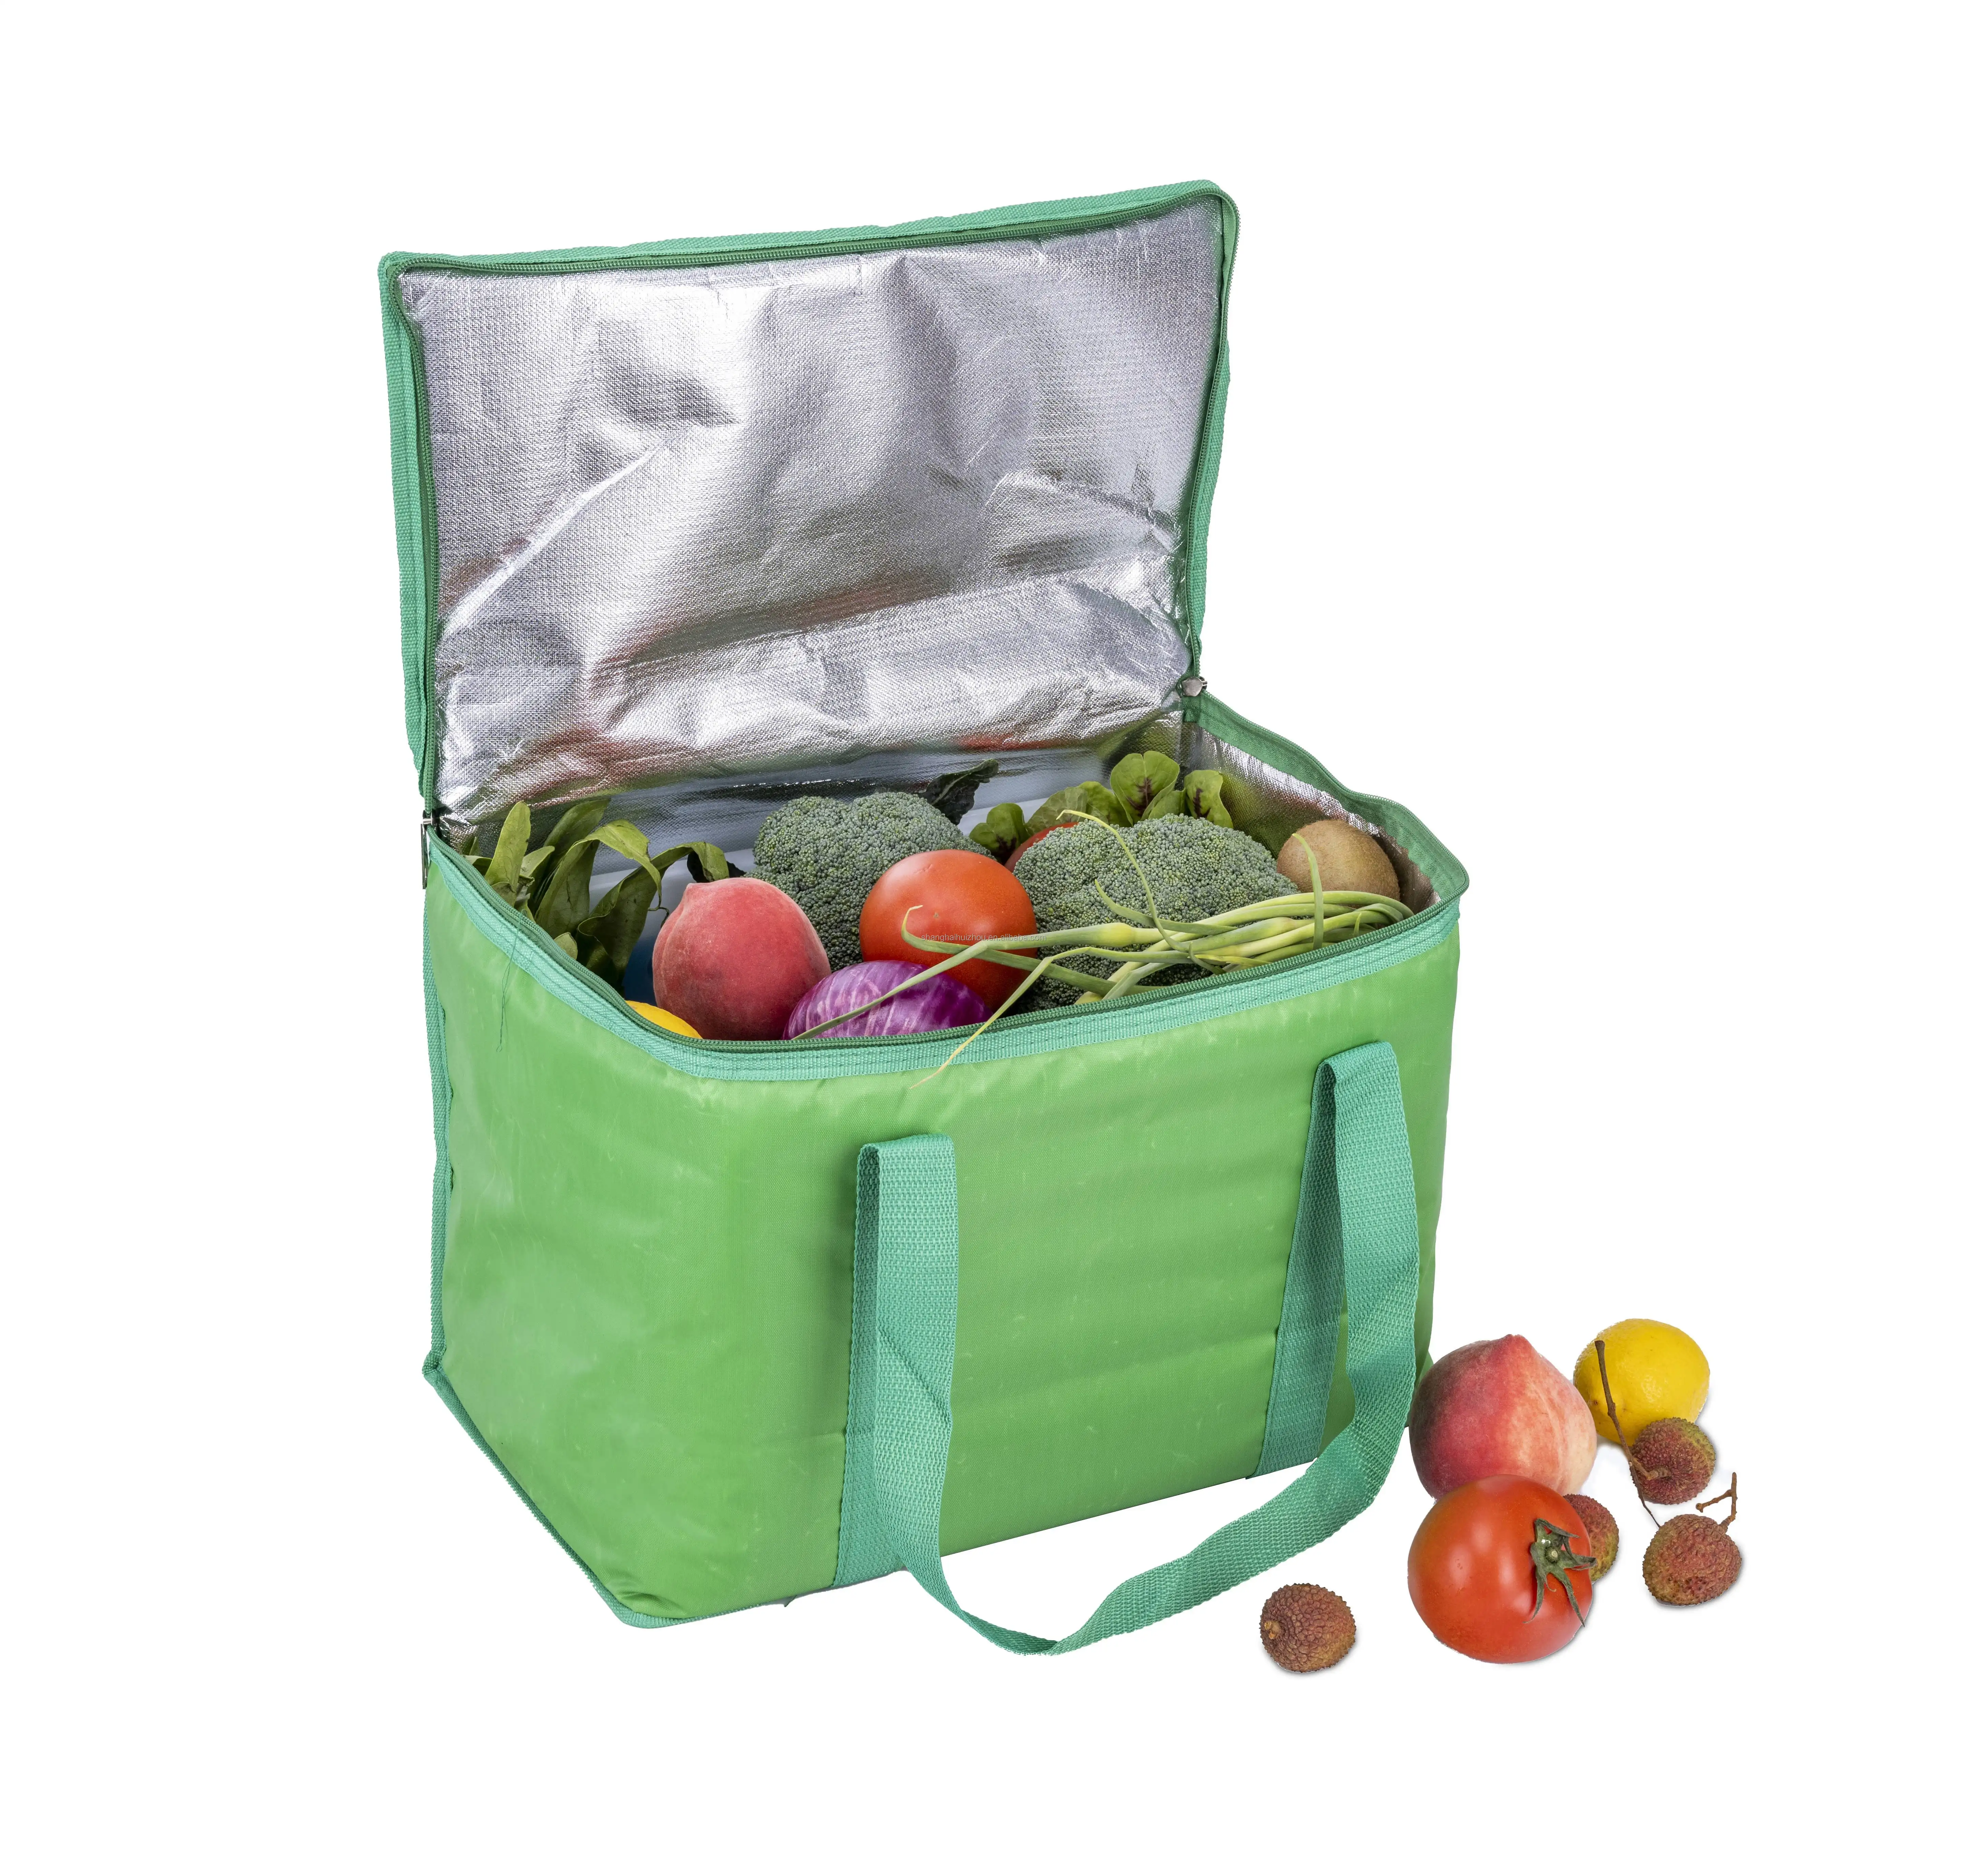 Food Use And Oxford Material Ice Cooler Lunch Bag With Carry Tote Bag Picnic Camping Multi Function Carry Isothermal Cooler Bag